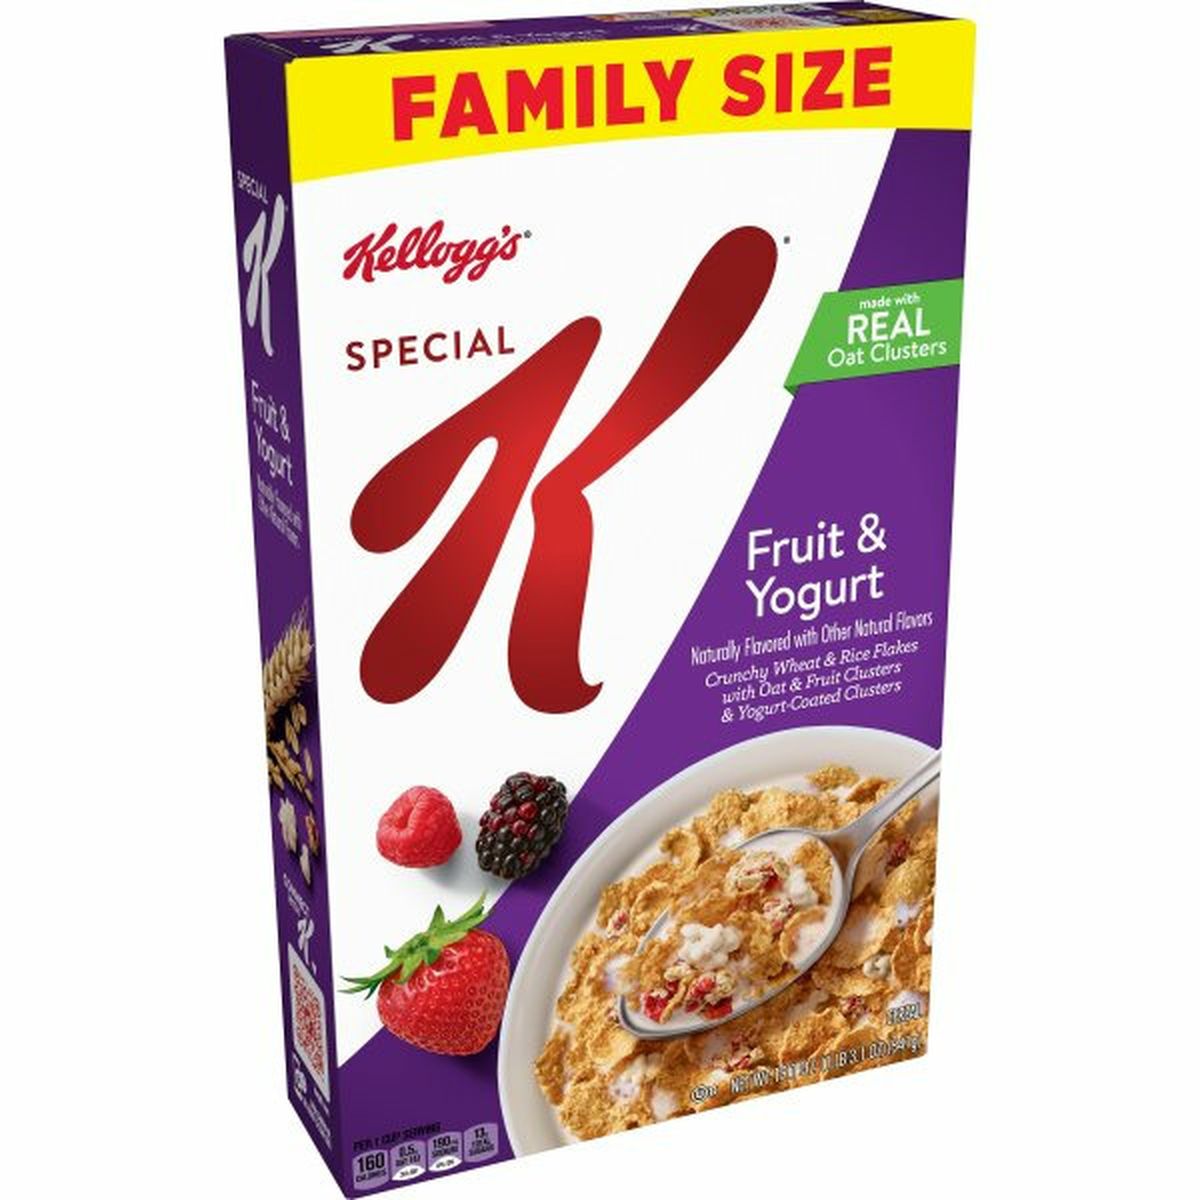 Calories in Kellogg's Special K Cereal Kellogg's Special K Breakfast Cereal, Fruit and Yogurt, Family Size, Made with Real Oat Clusters, 19.1oz